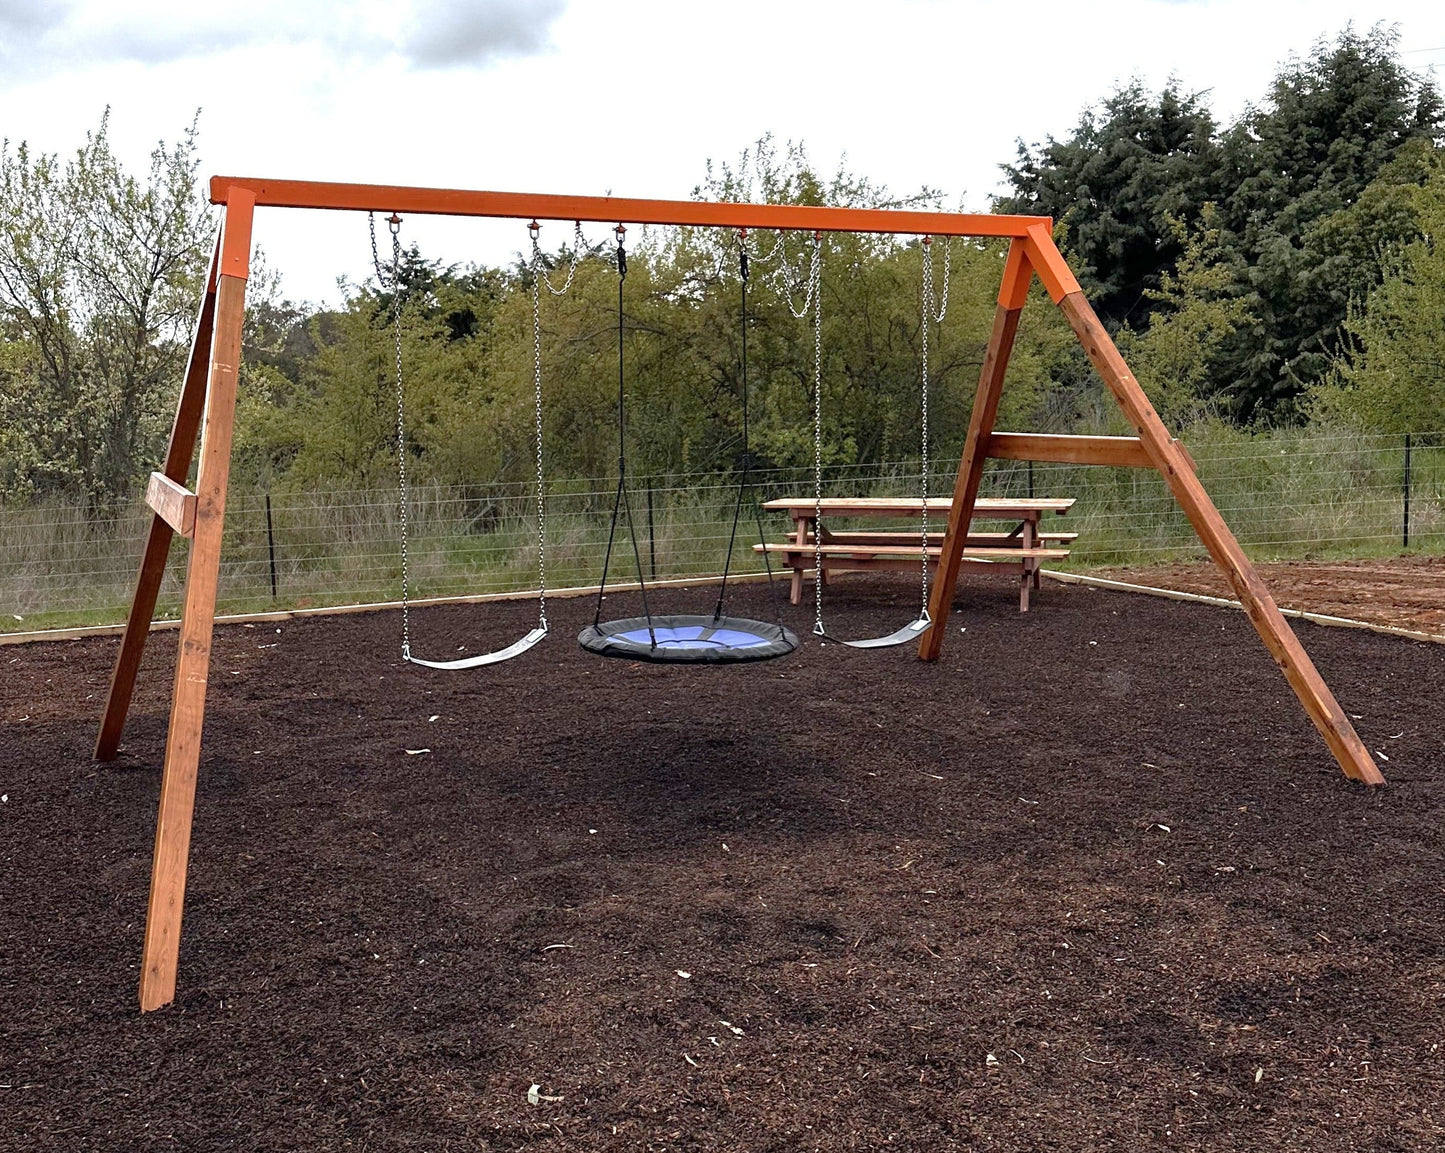 Commercial Triple Swing Set with Timber Legs